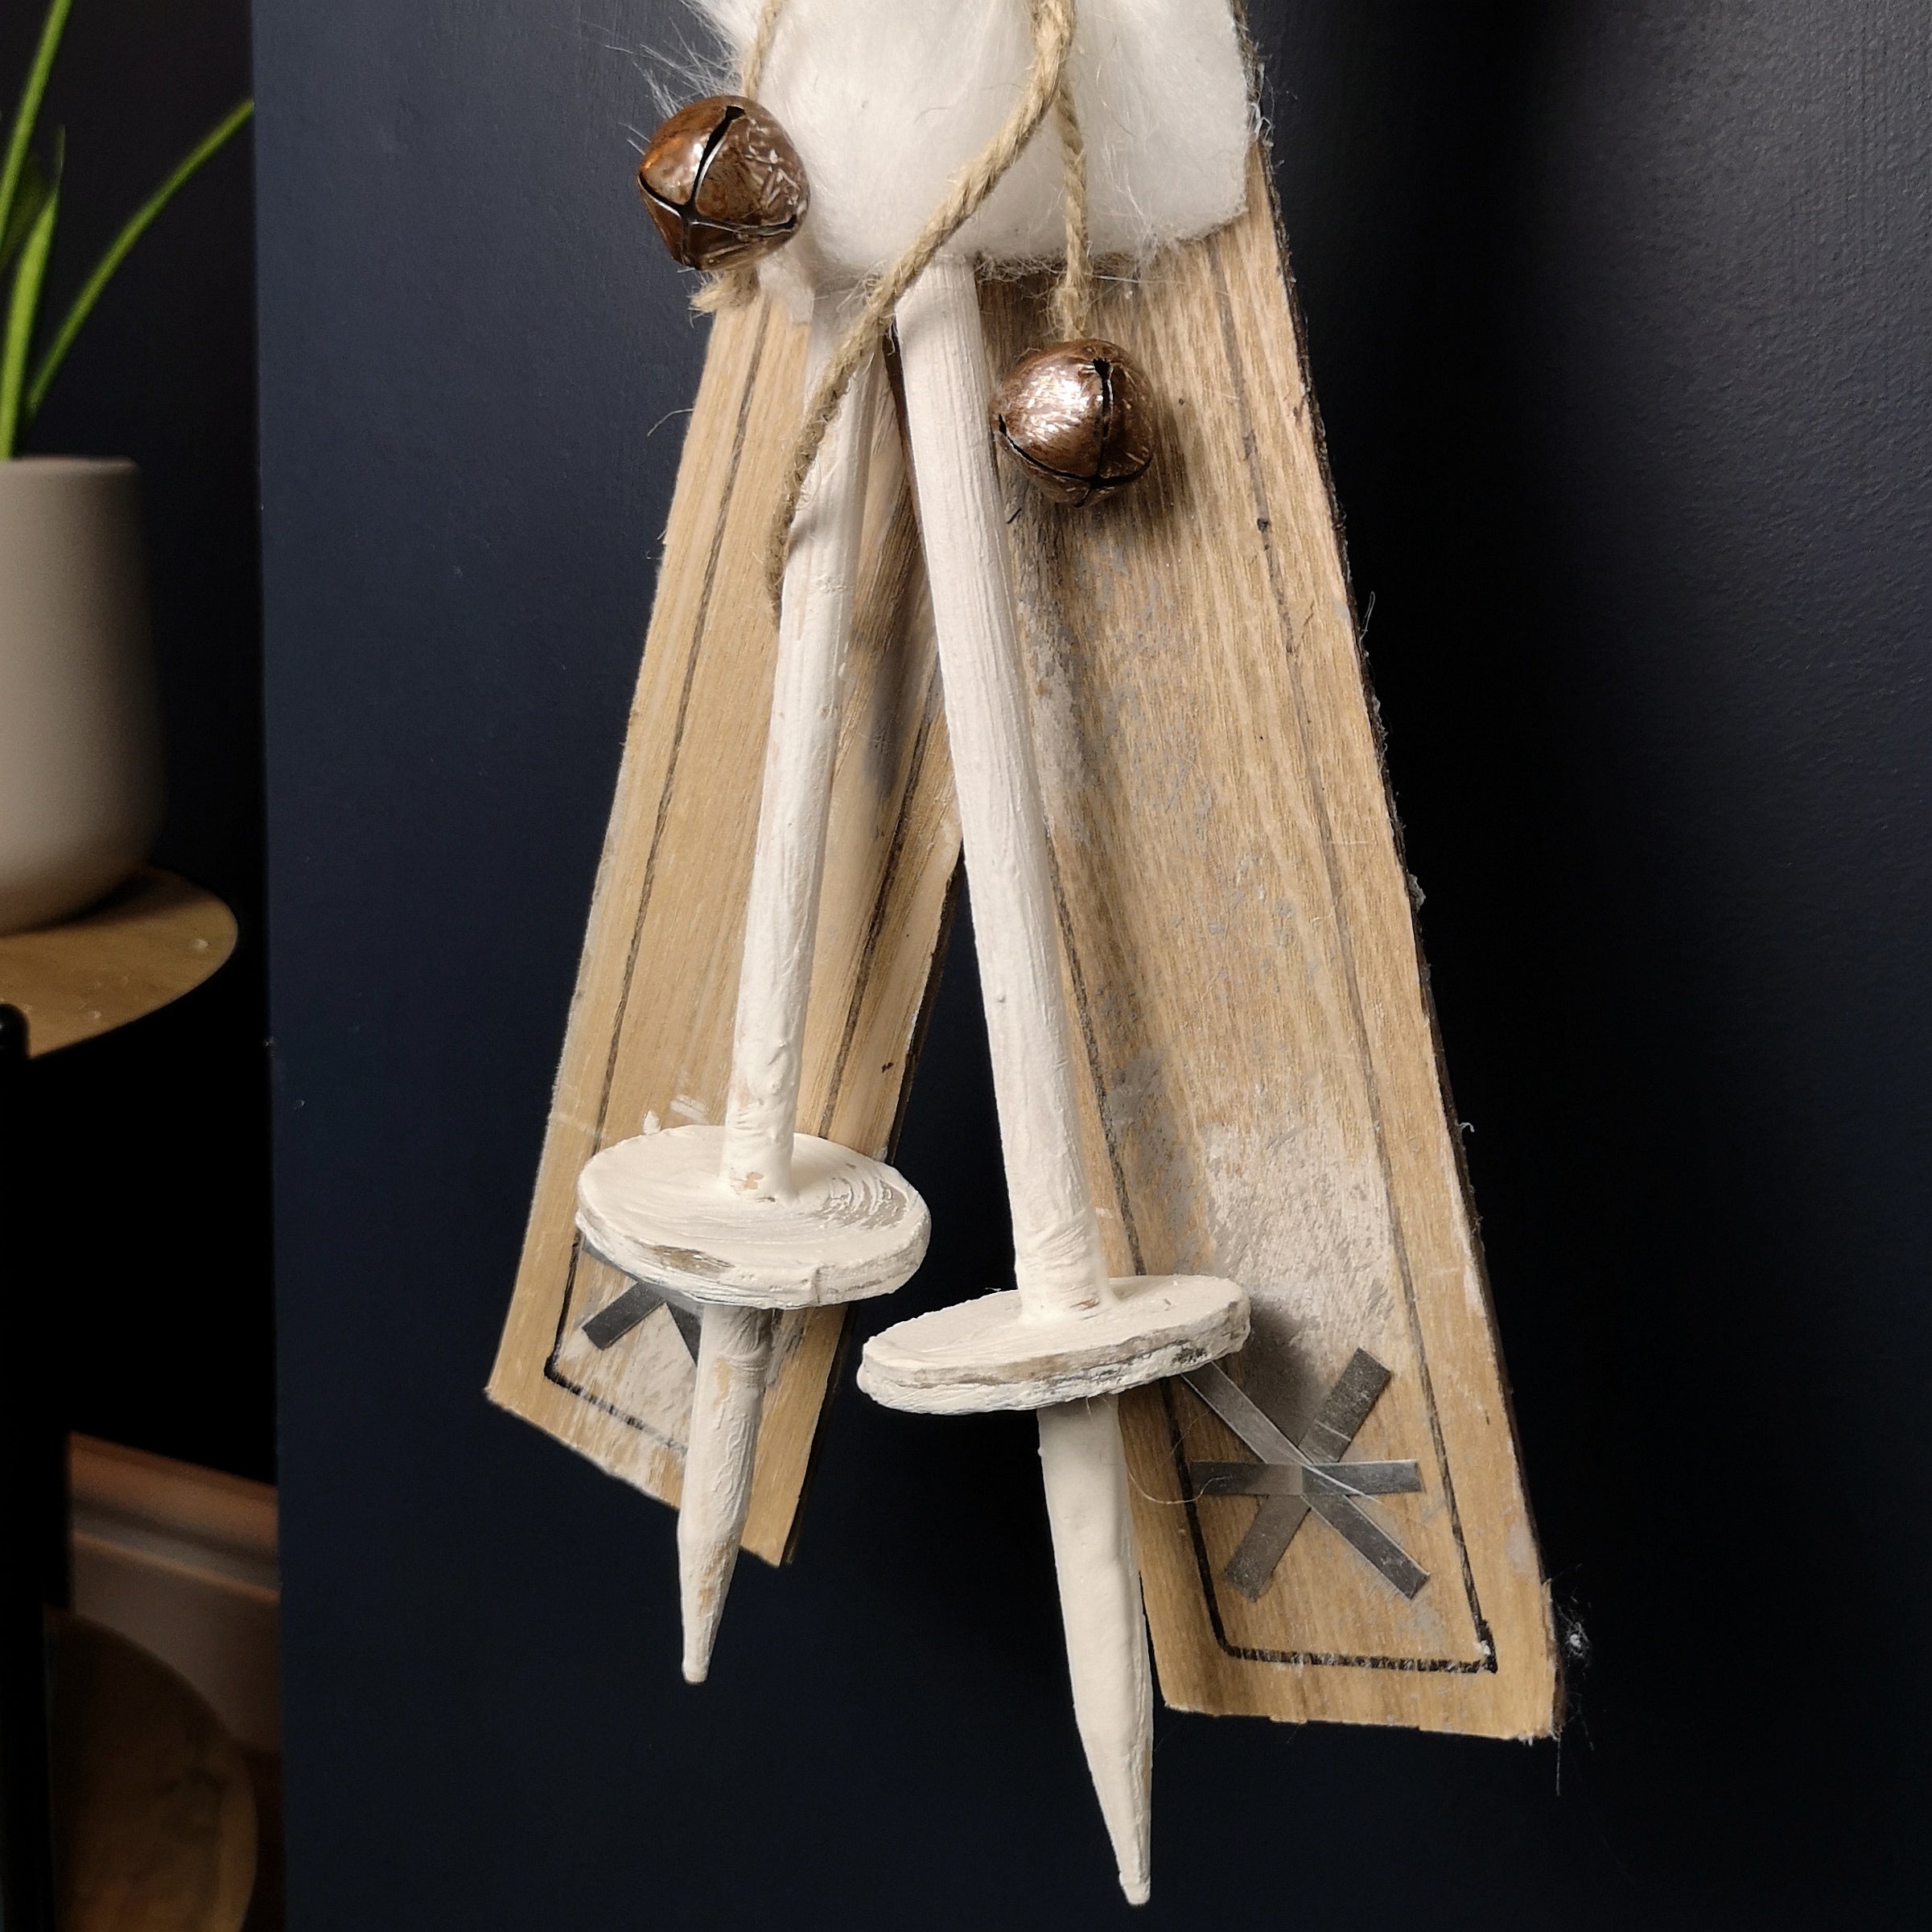 55cm Wooden Skis with Decorative White Fur and Silver Bells Christmas Decoration